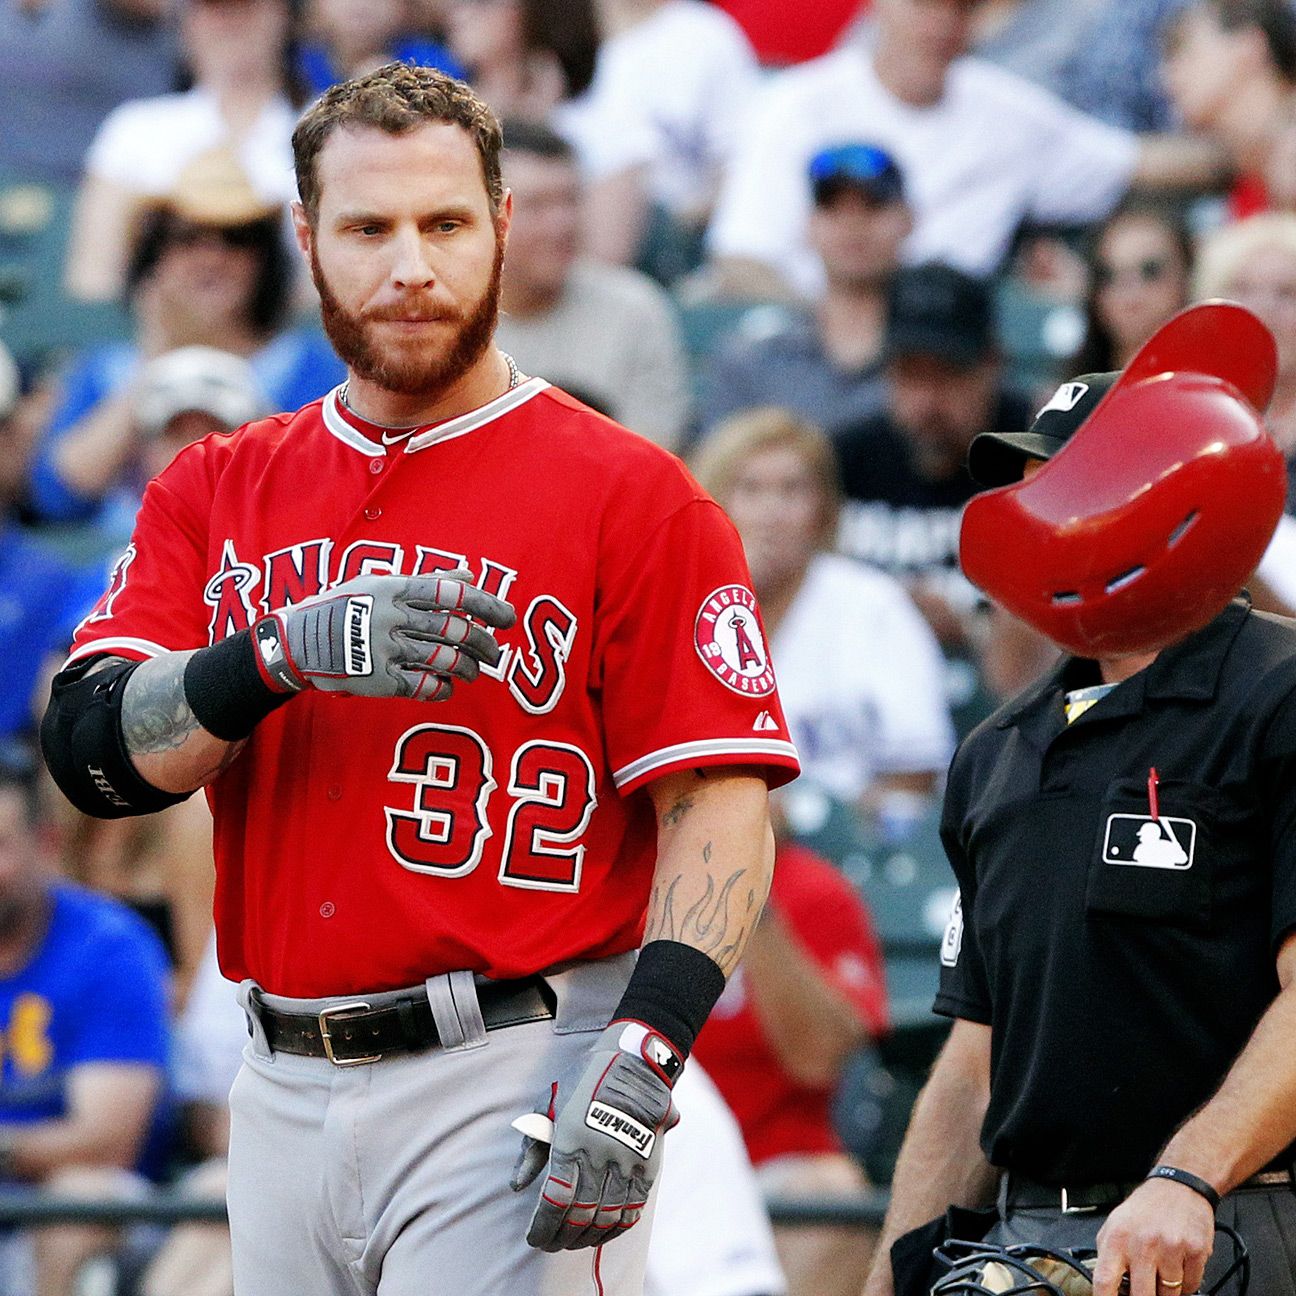 MLB Free Agency: Are There Options for Josh Hamilton?